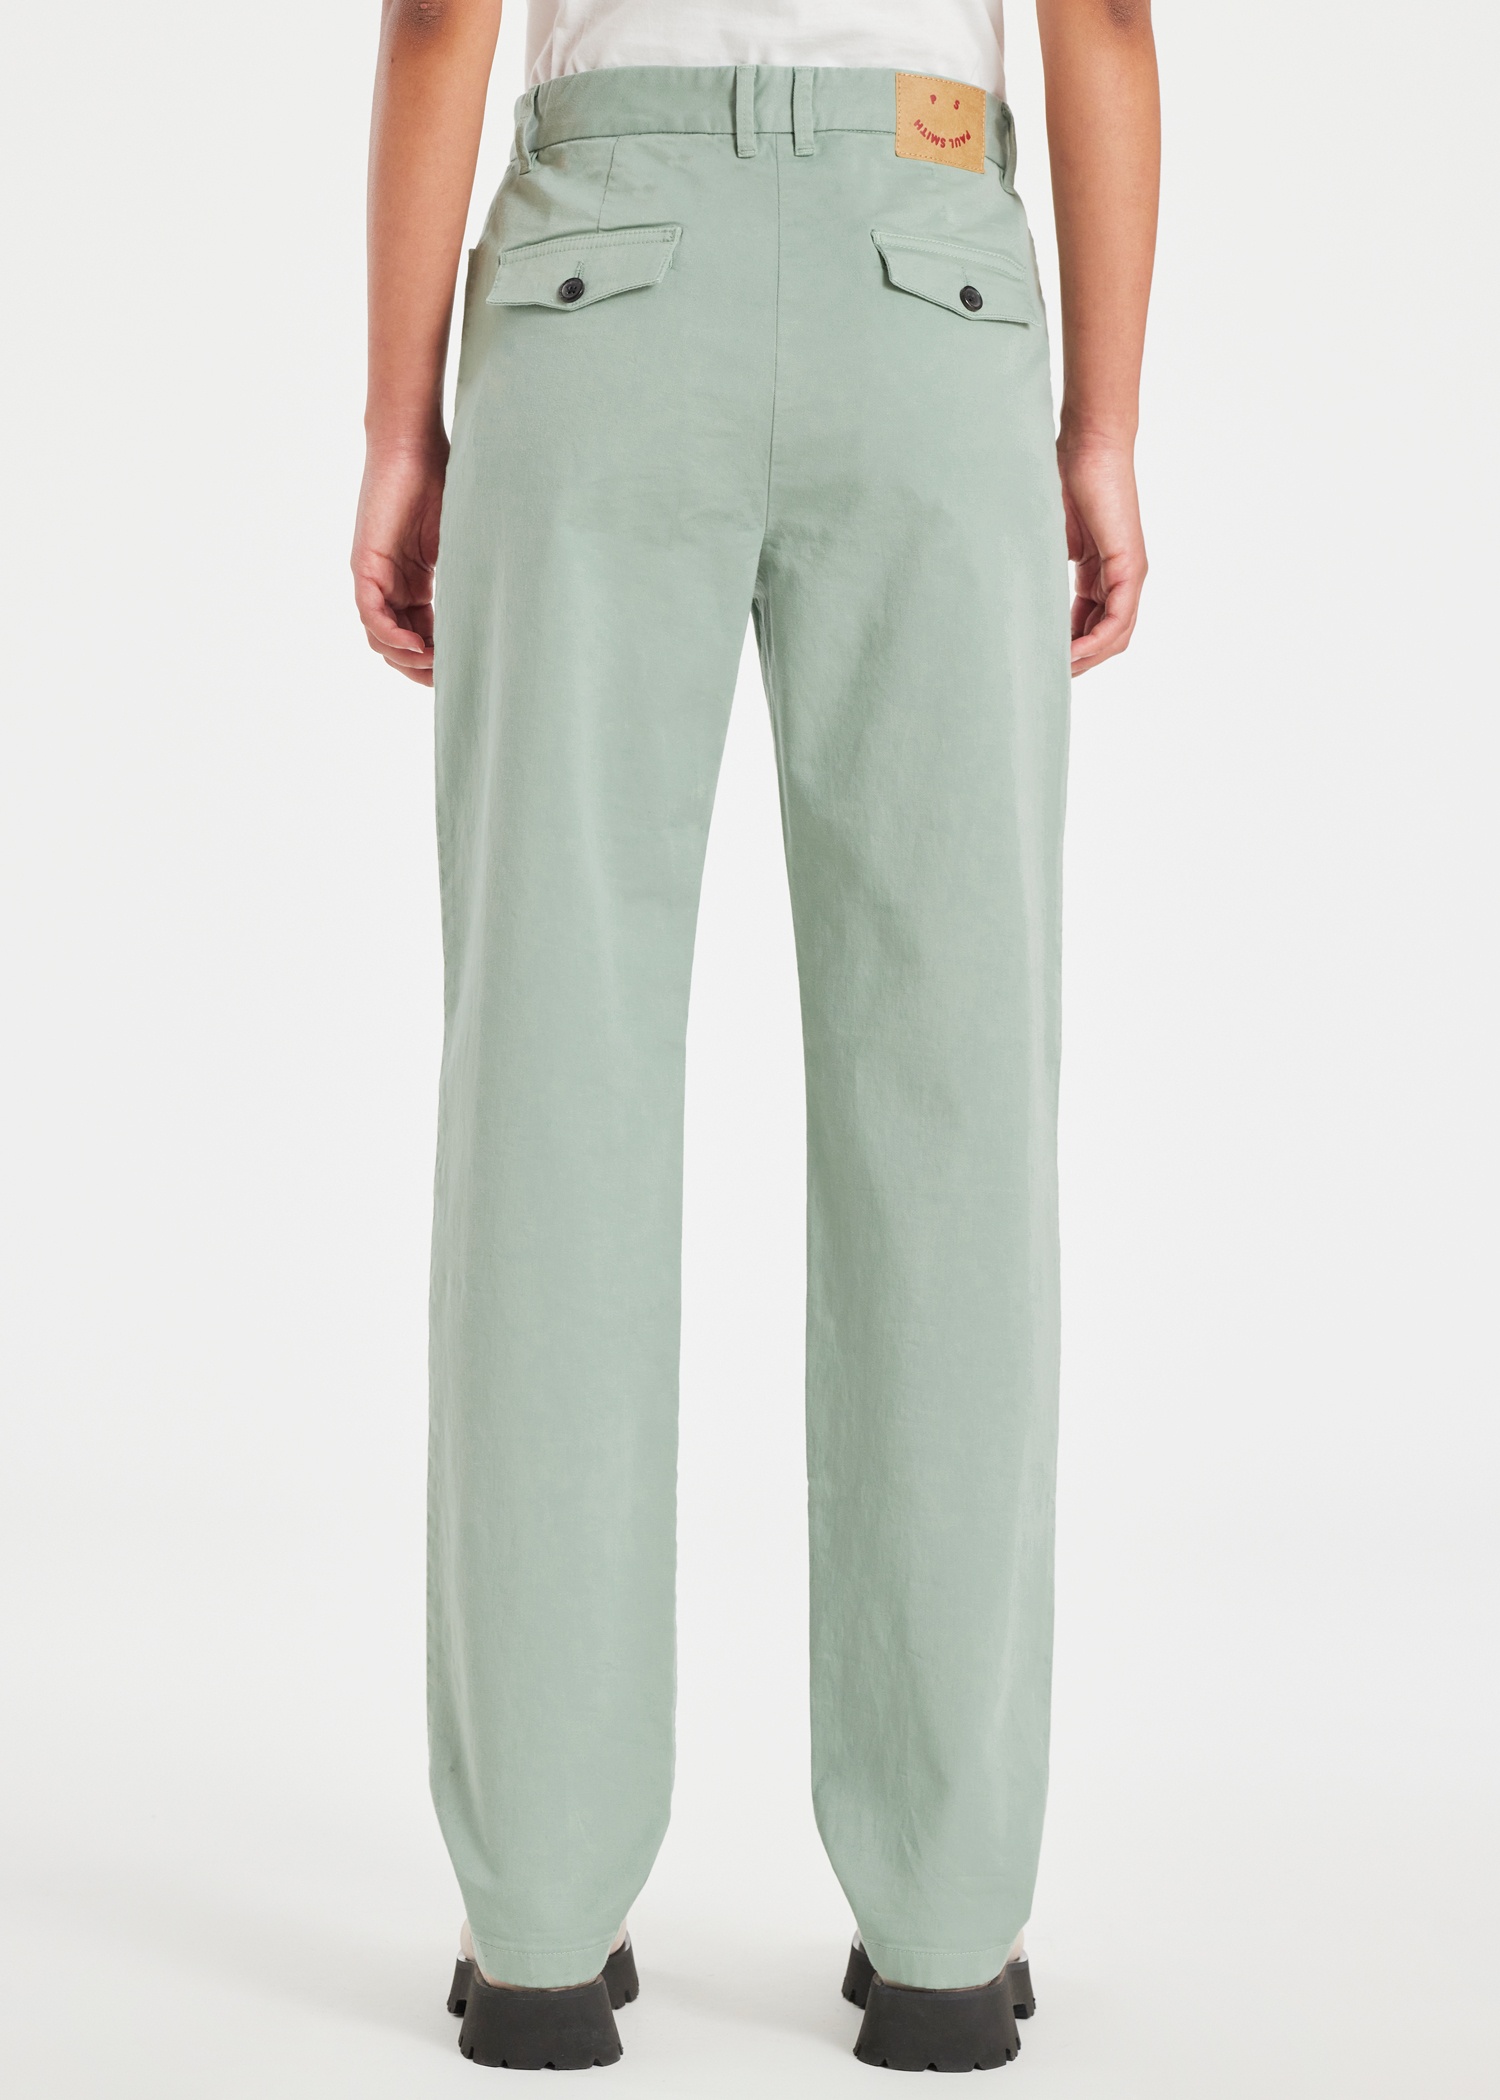 Women's Mint Green Stretch-Cotton Slim-Fit Chinos - 4